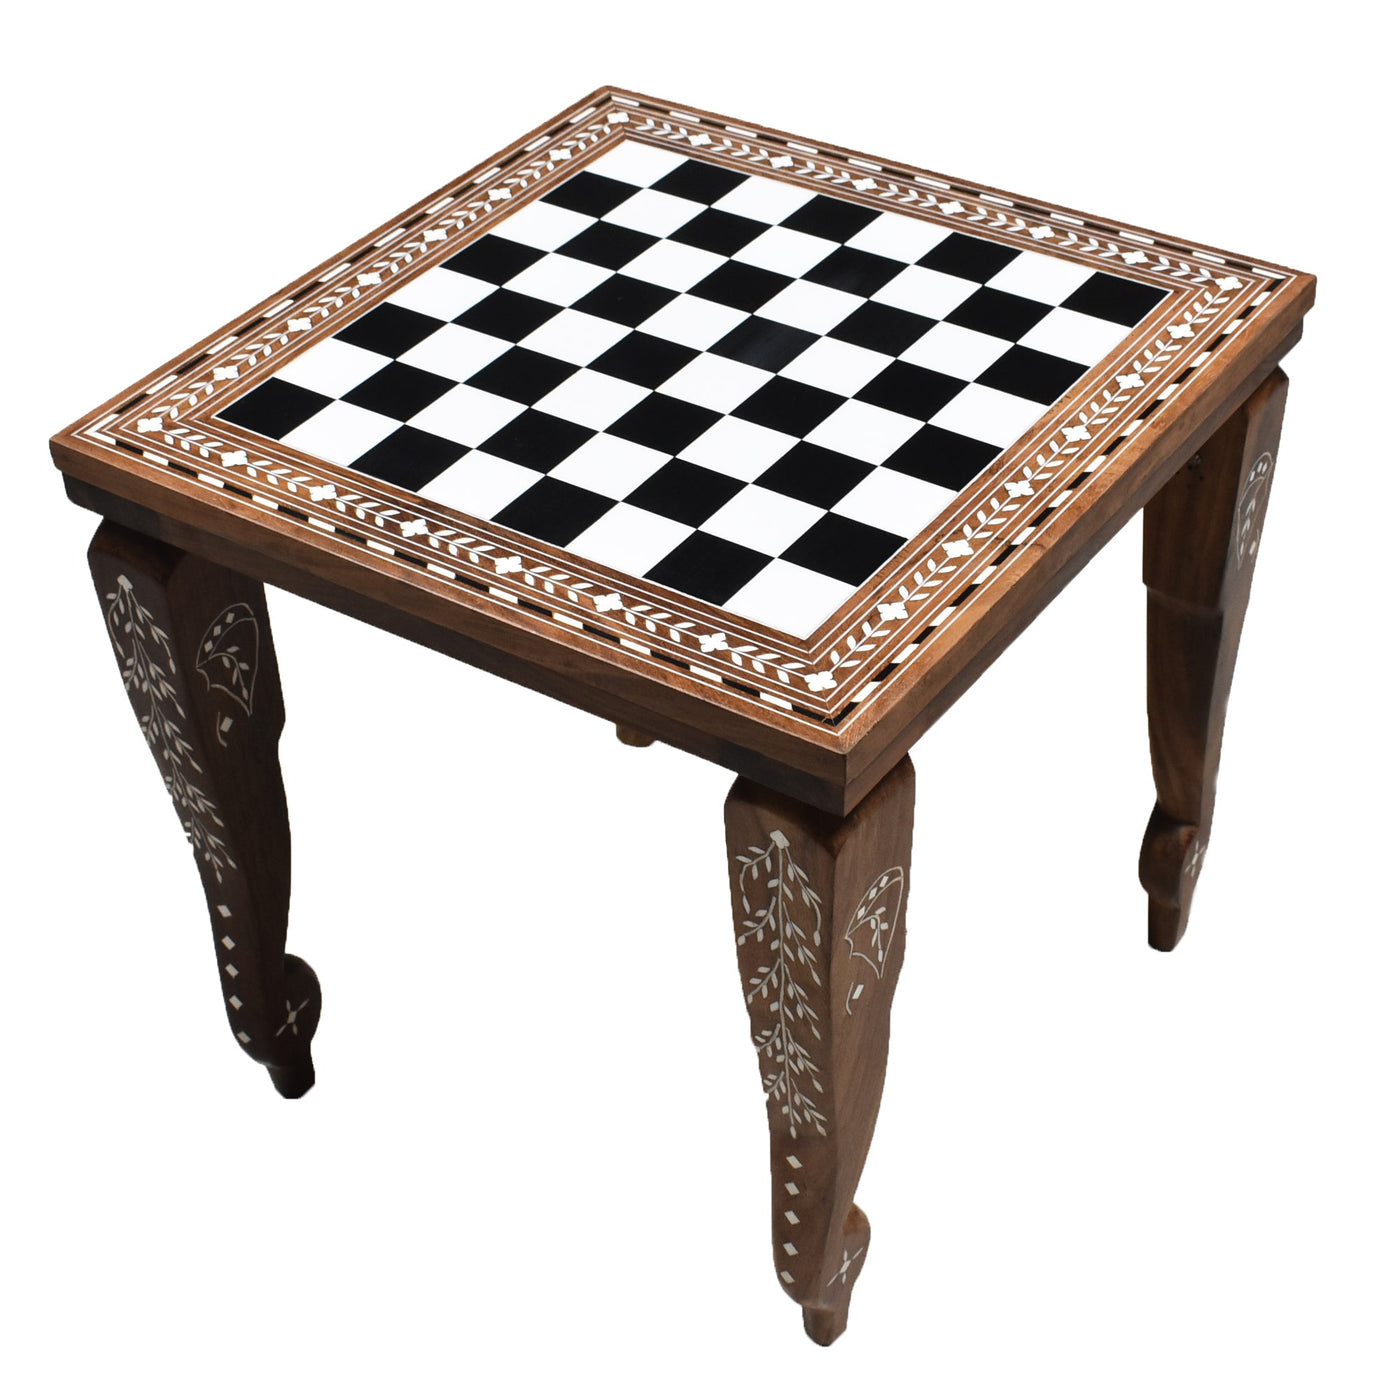 Wooden Chess Board Table | Tournament Chess Pieces | Foldable Chess Set